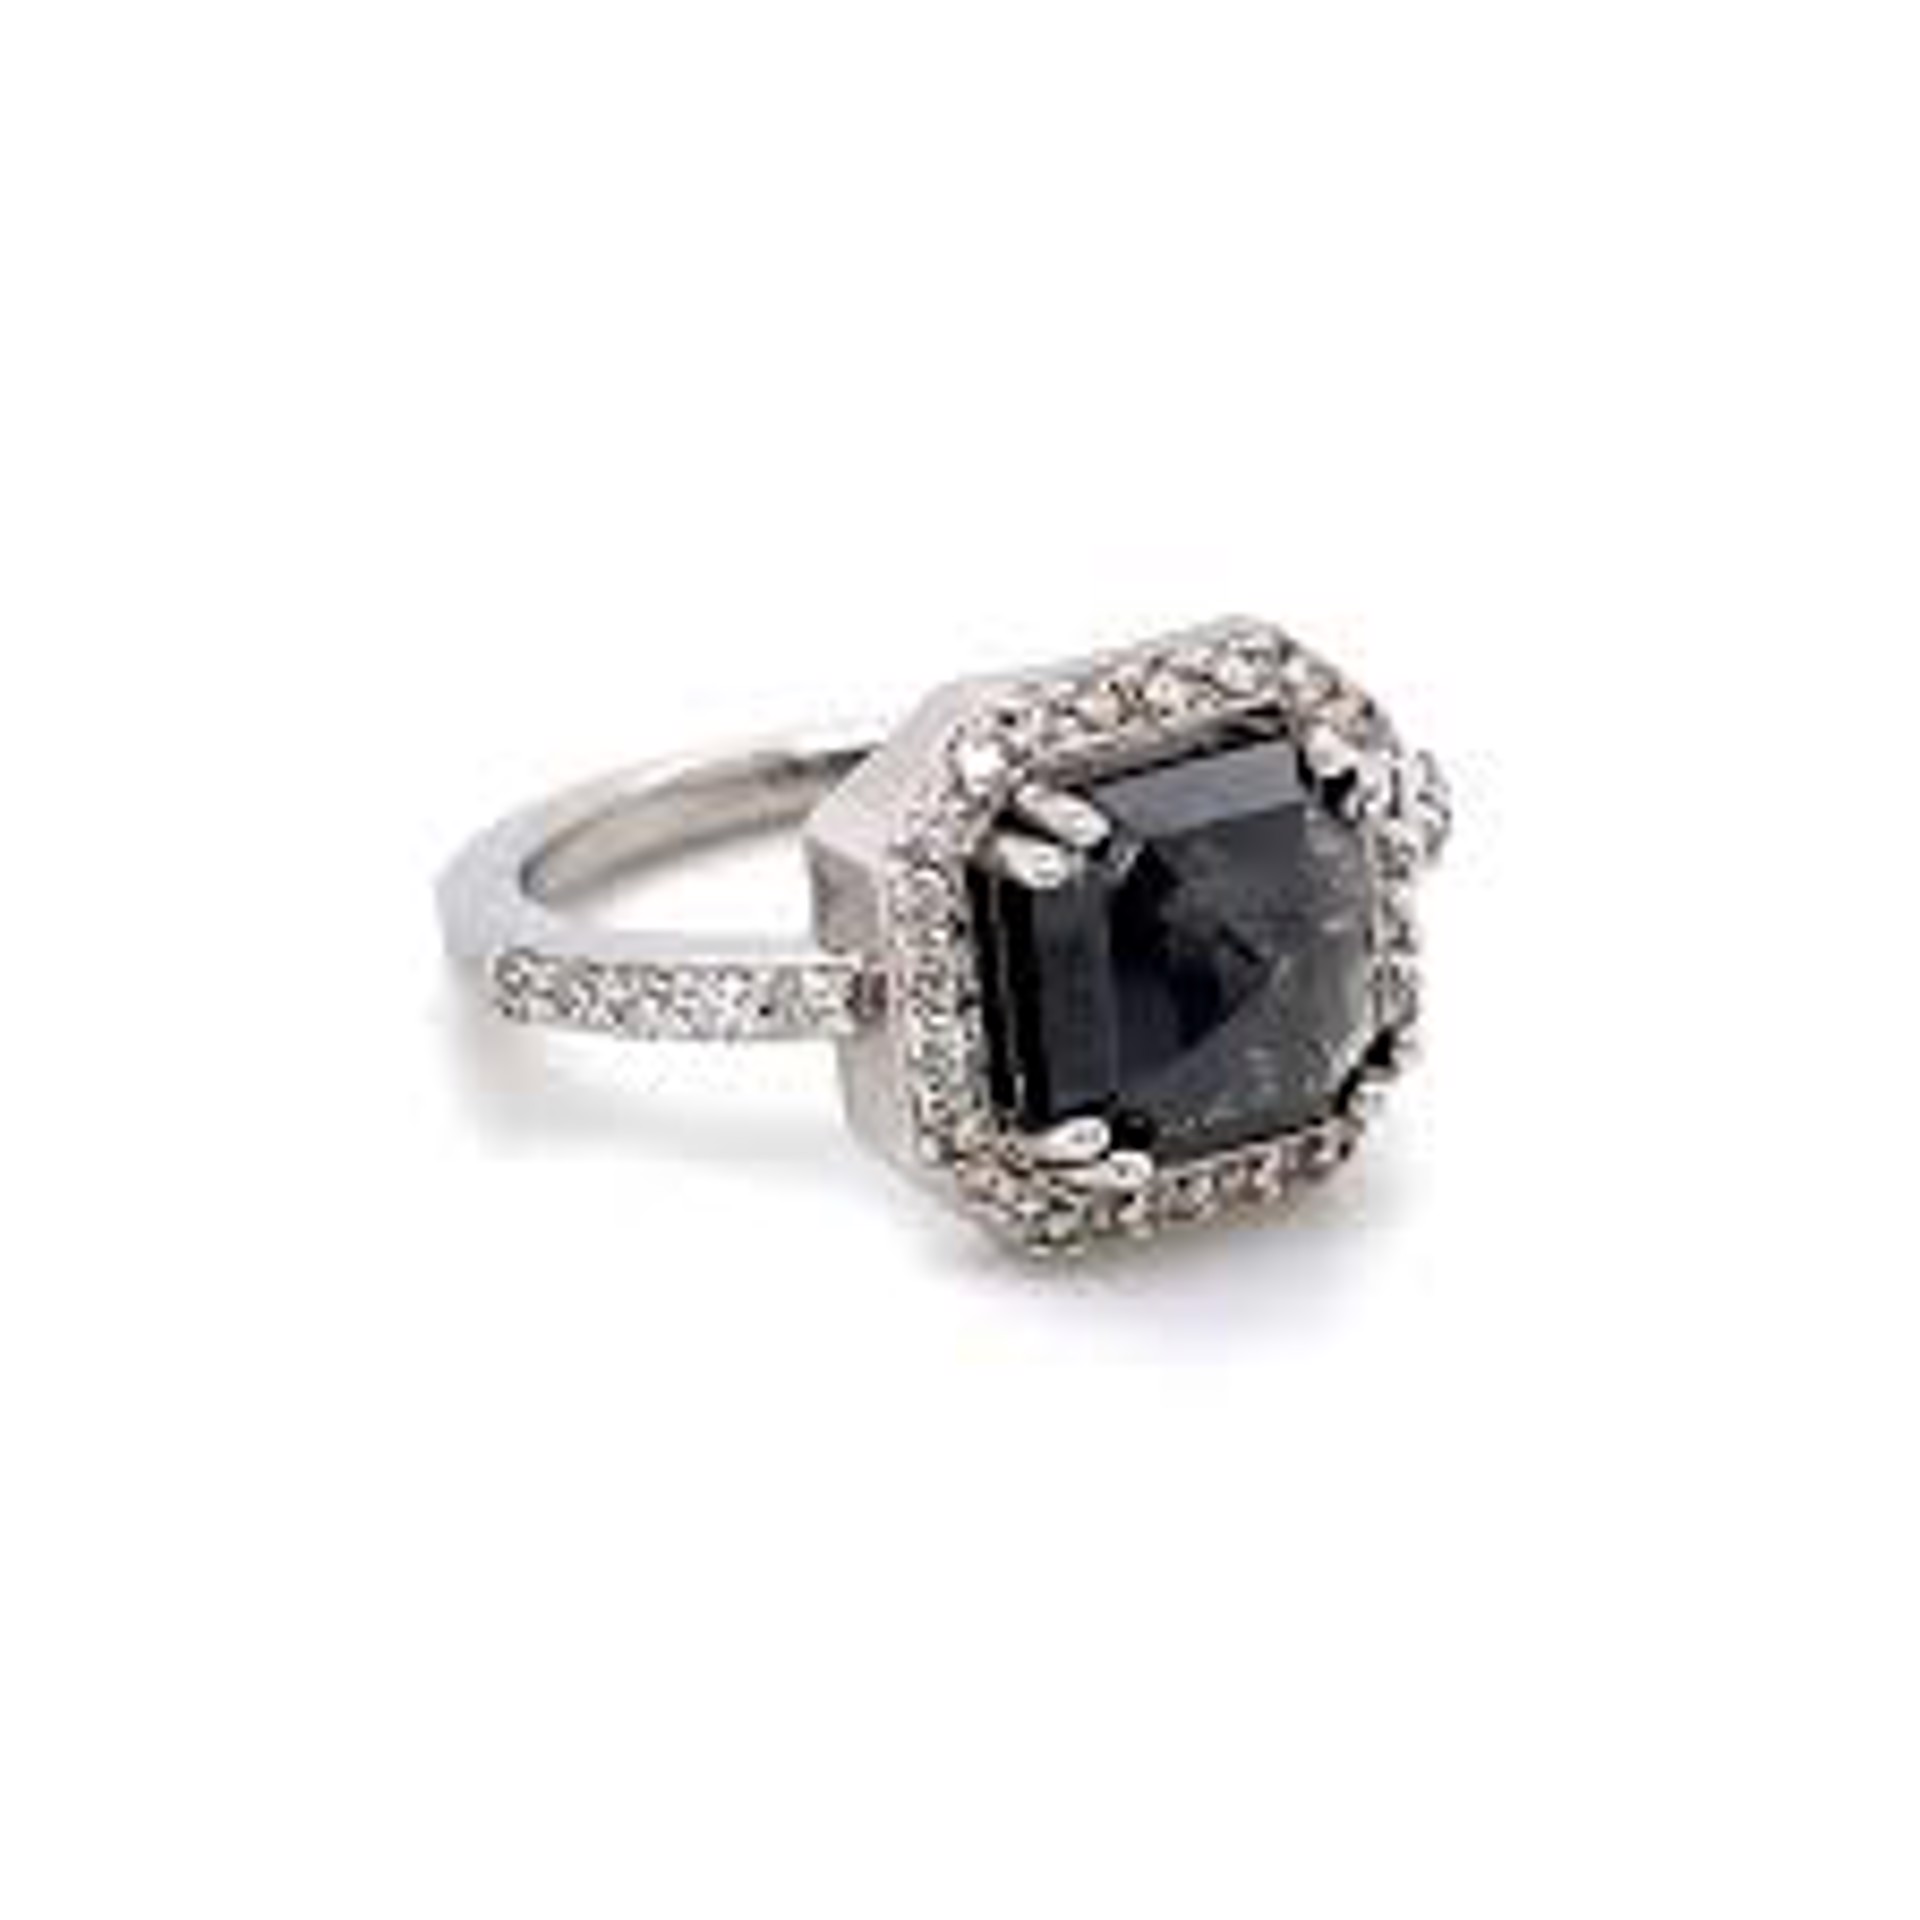 Black Diamond Rose Cut Ring with white diamond halo by Llyn Strong